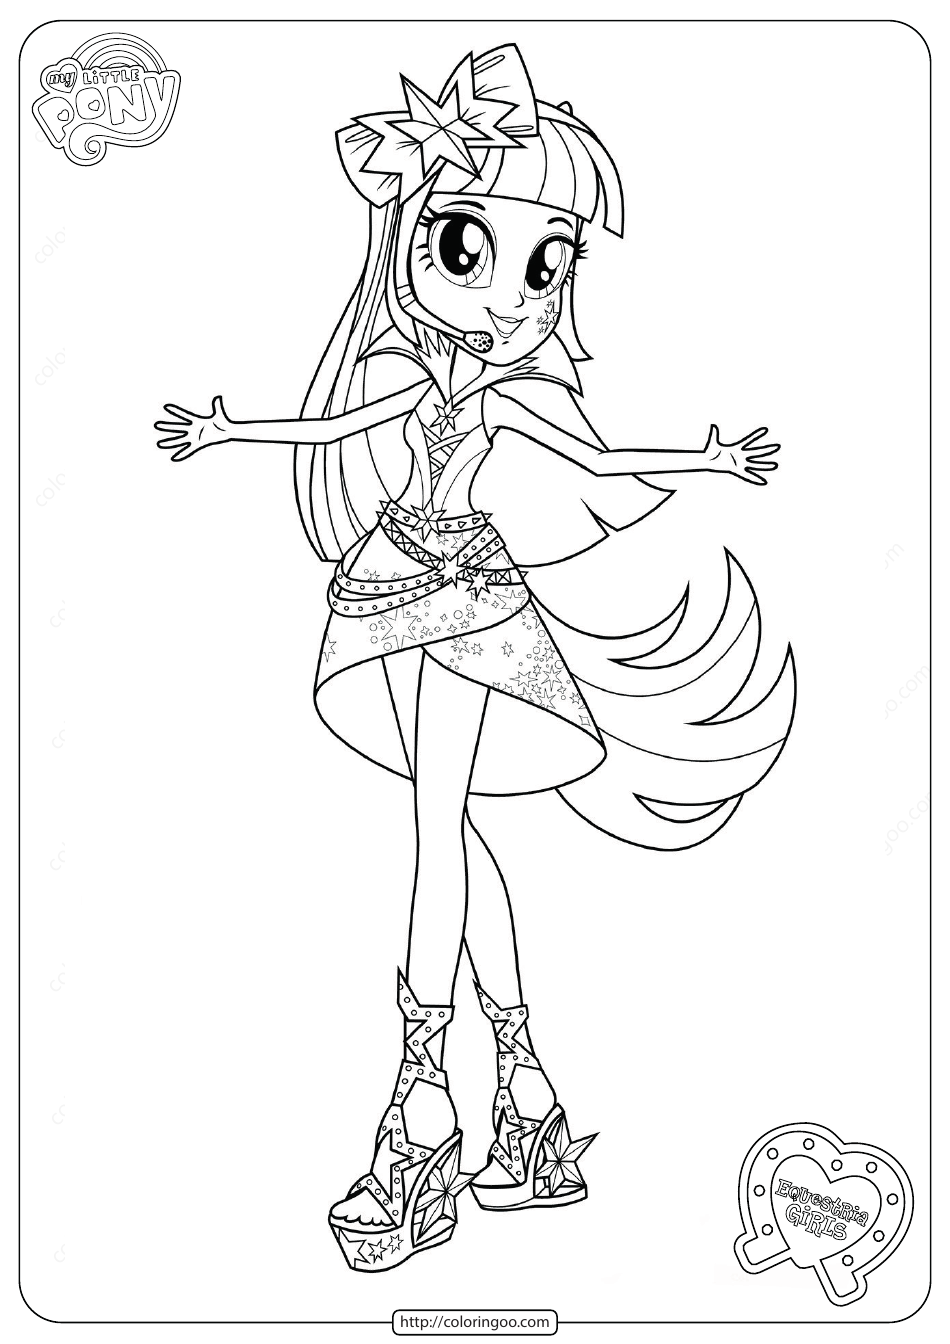 My Little Pony Equestria Girls Coloring Page - Rainbow Rocks, Page 1